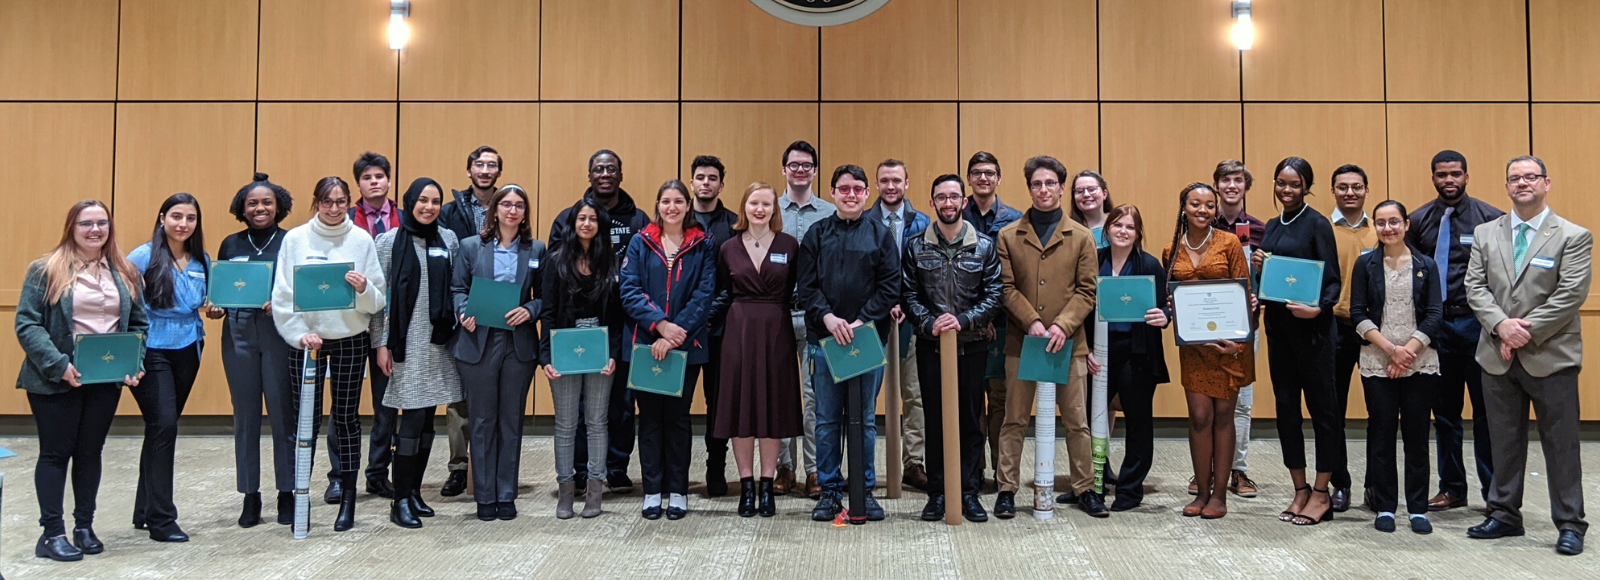 Group shot of student researchers at the 2020 symposium